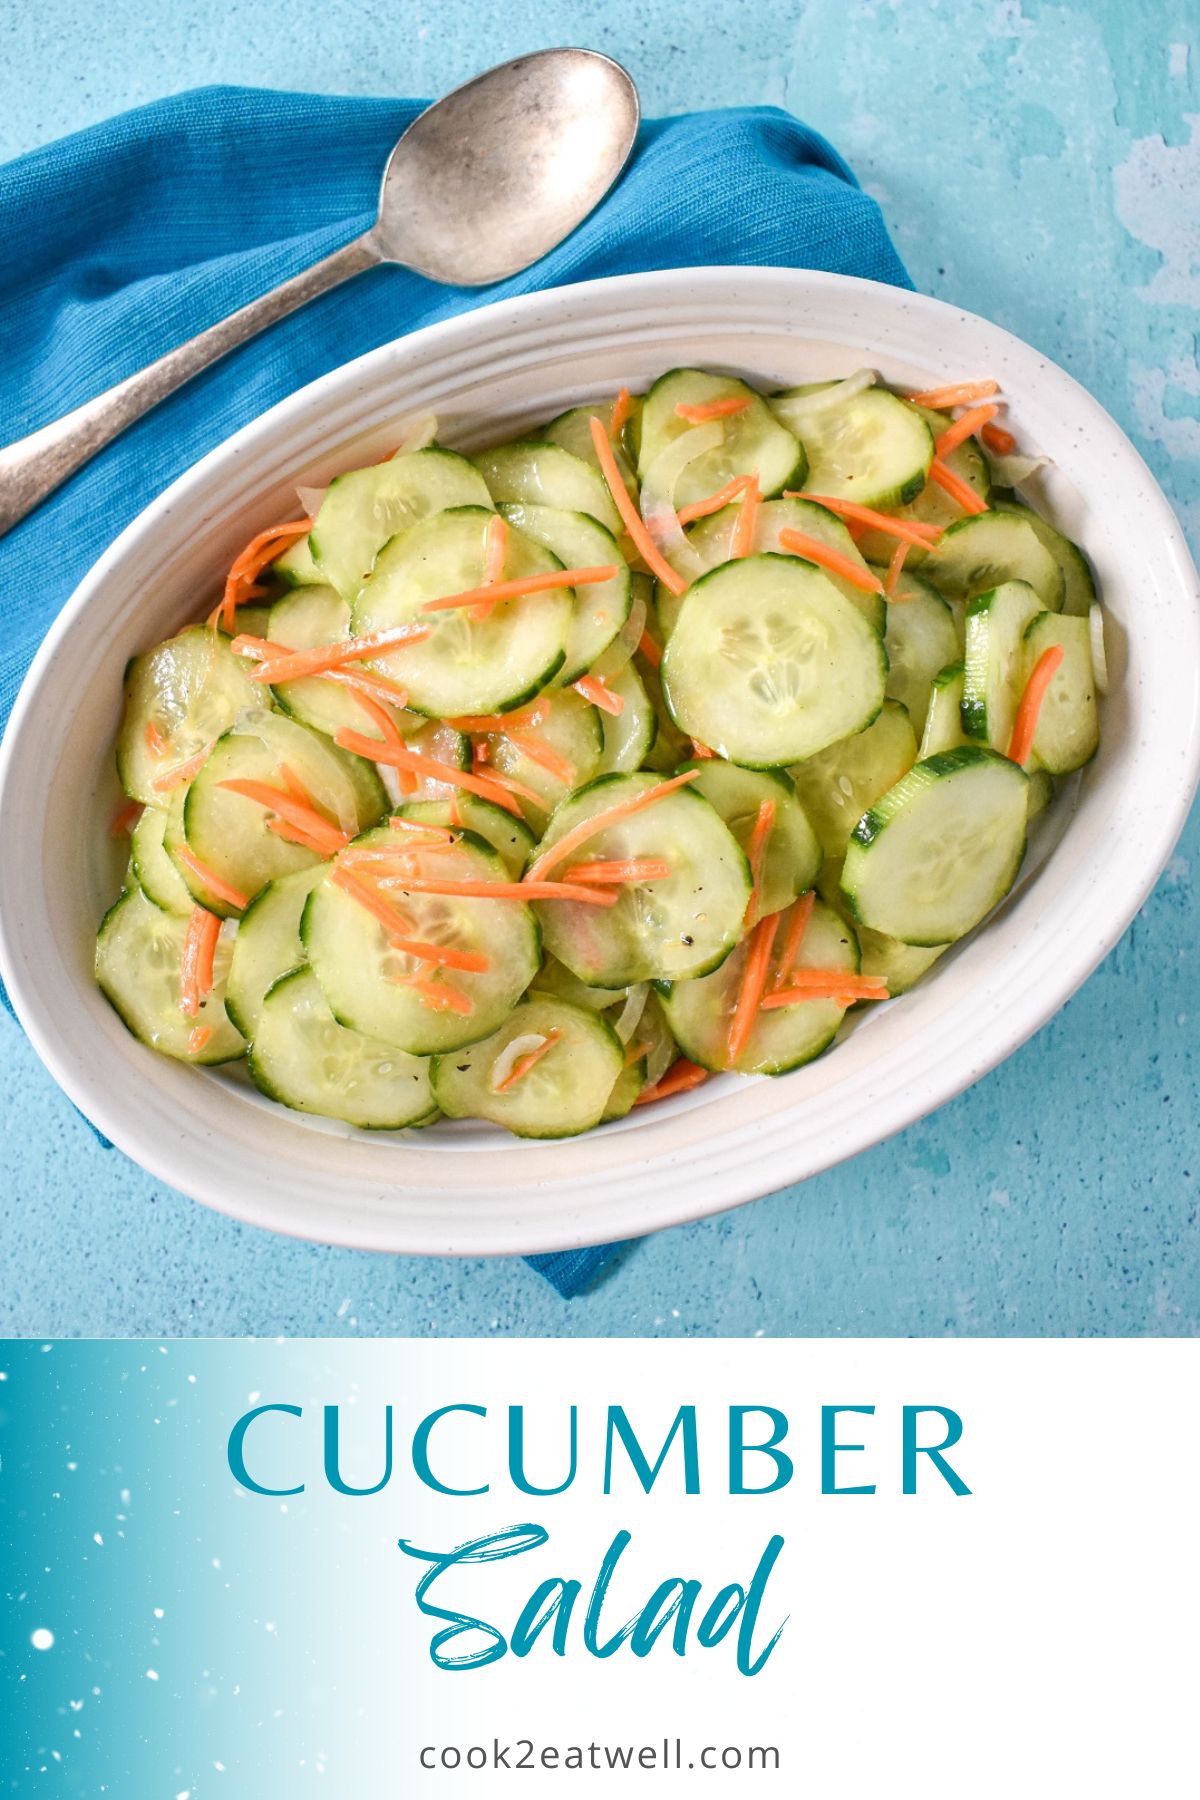 The cucumber salad served in a white bowl with a teal and white graphic underneath.